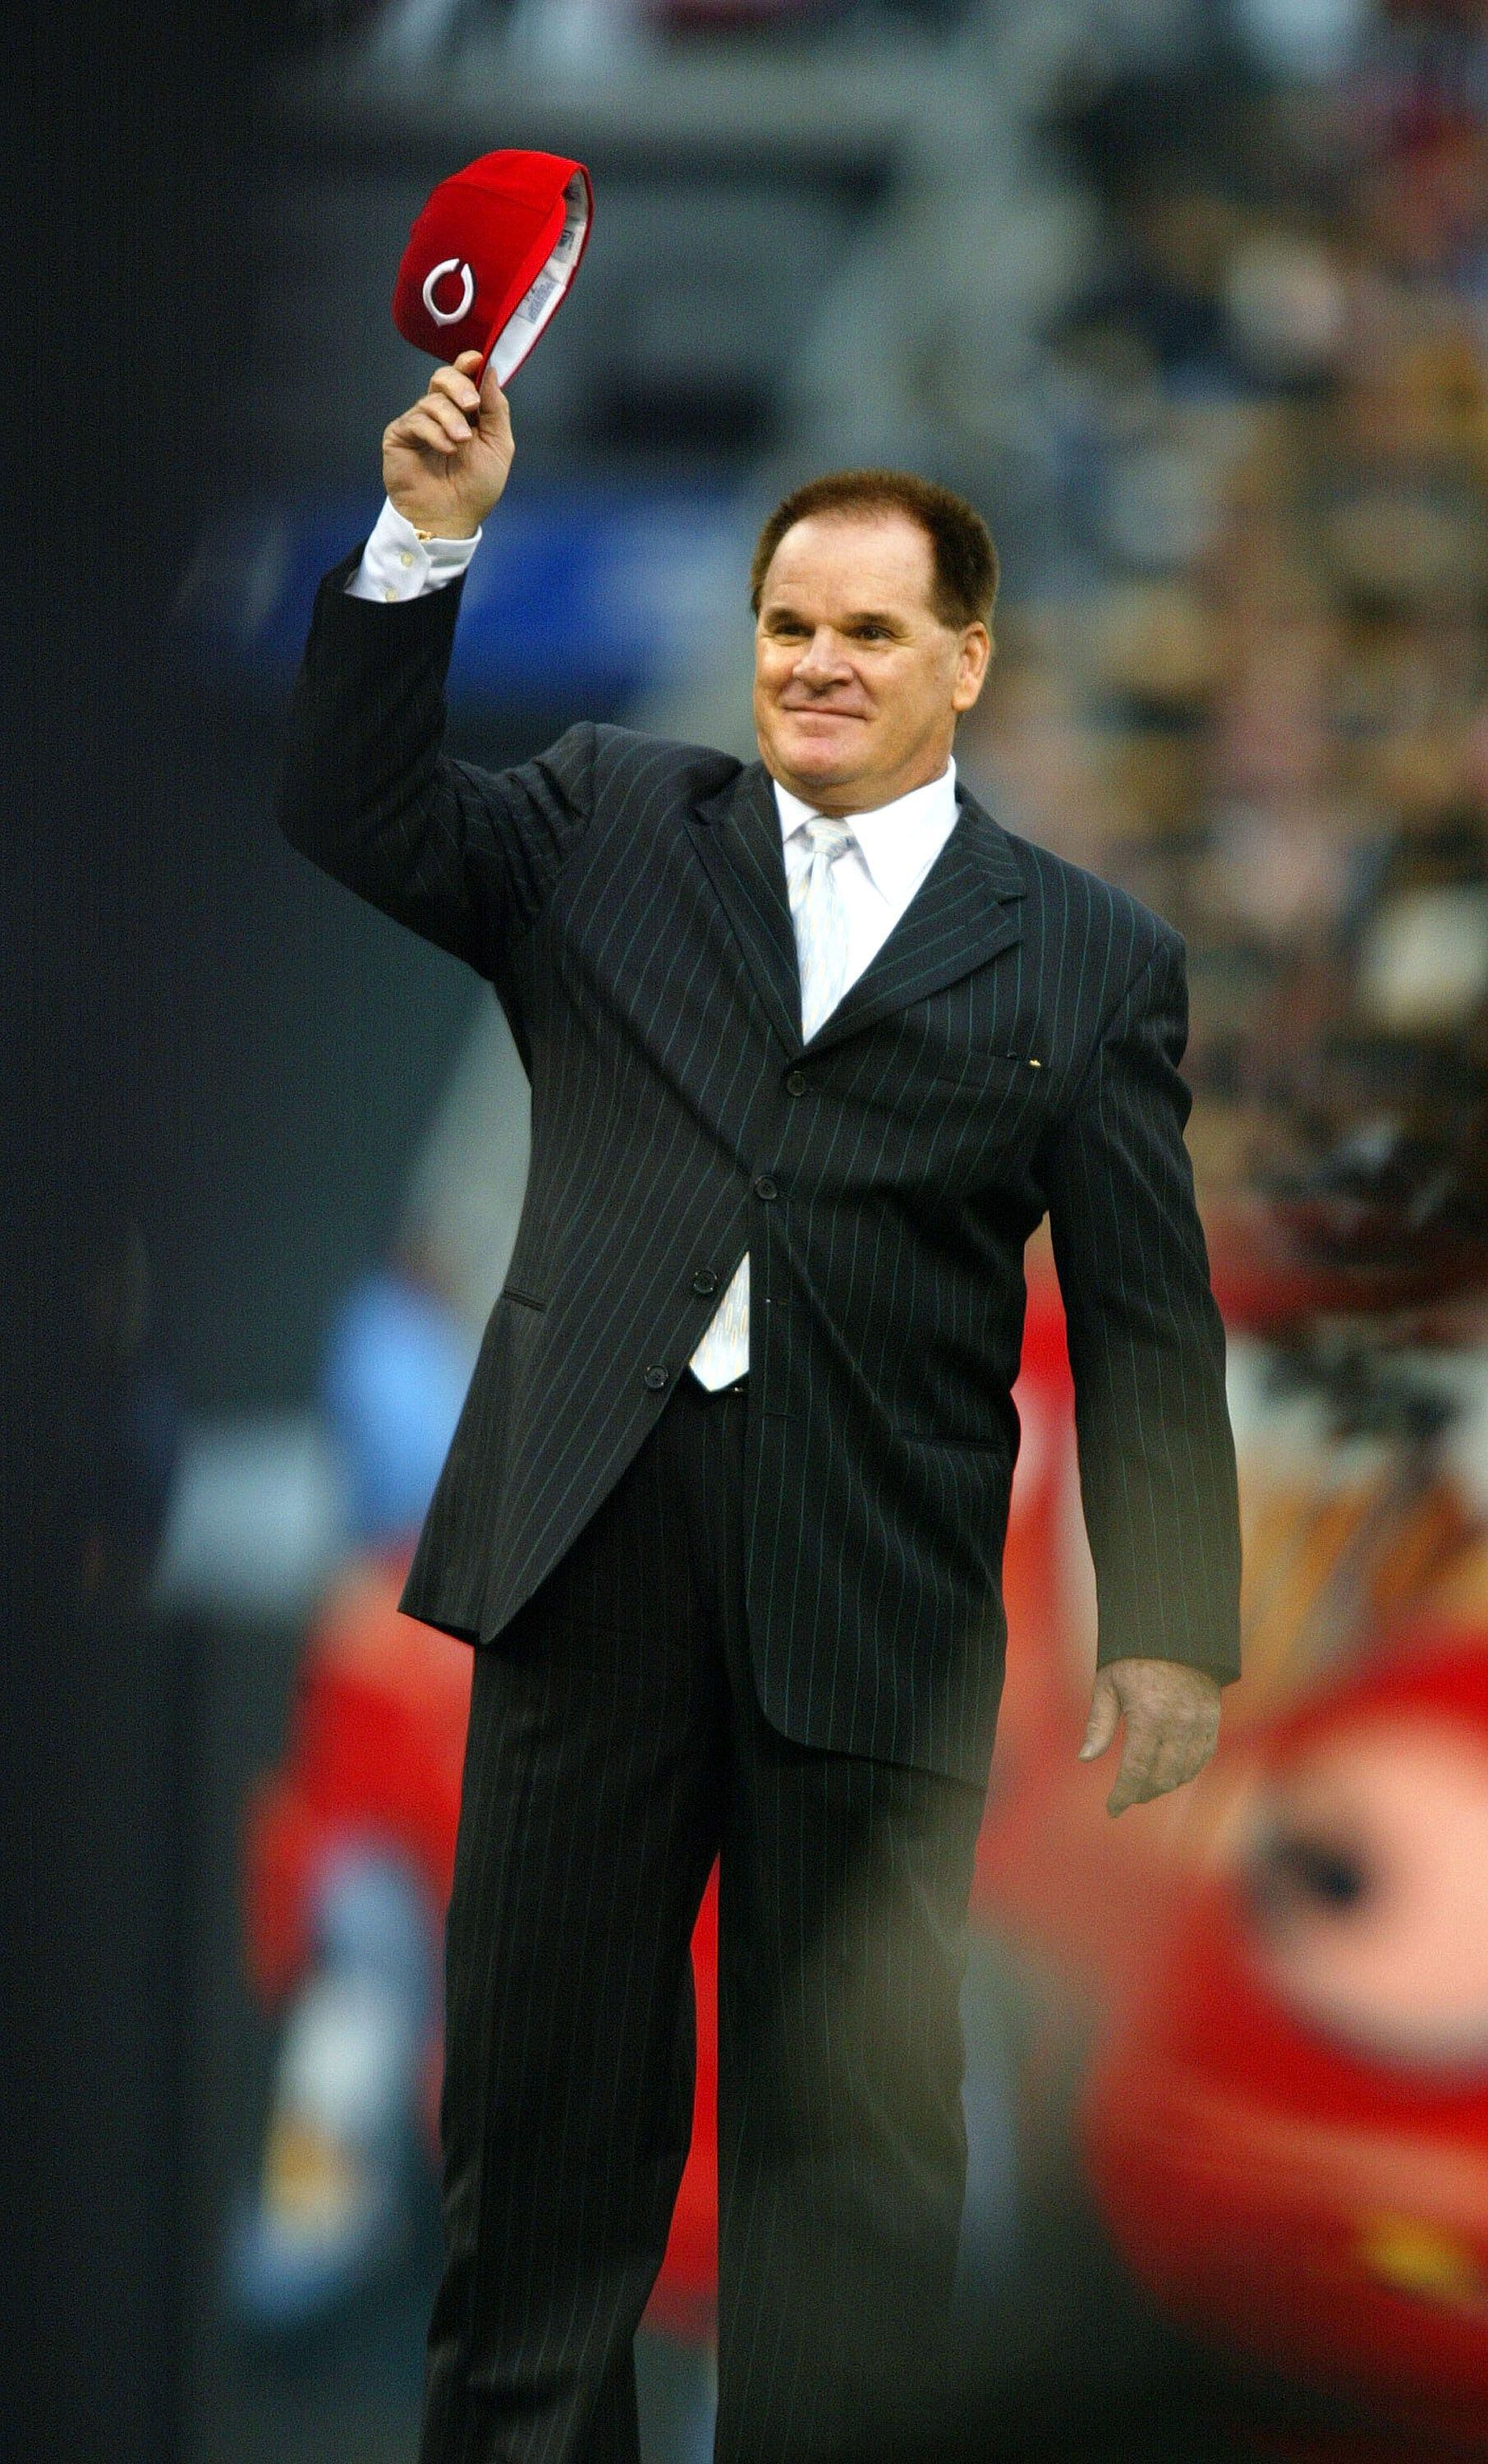 Throwback Thursday: Pete Rose through the years